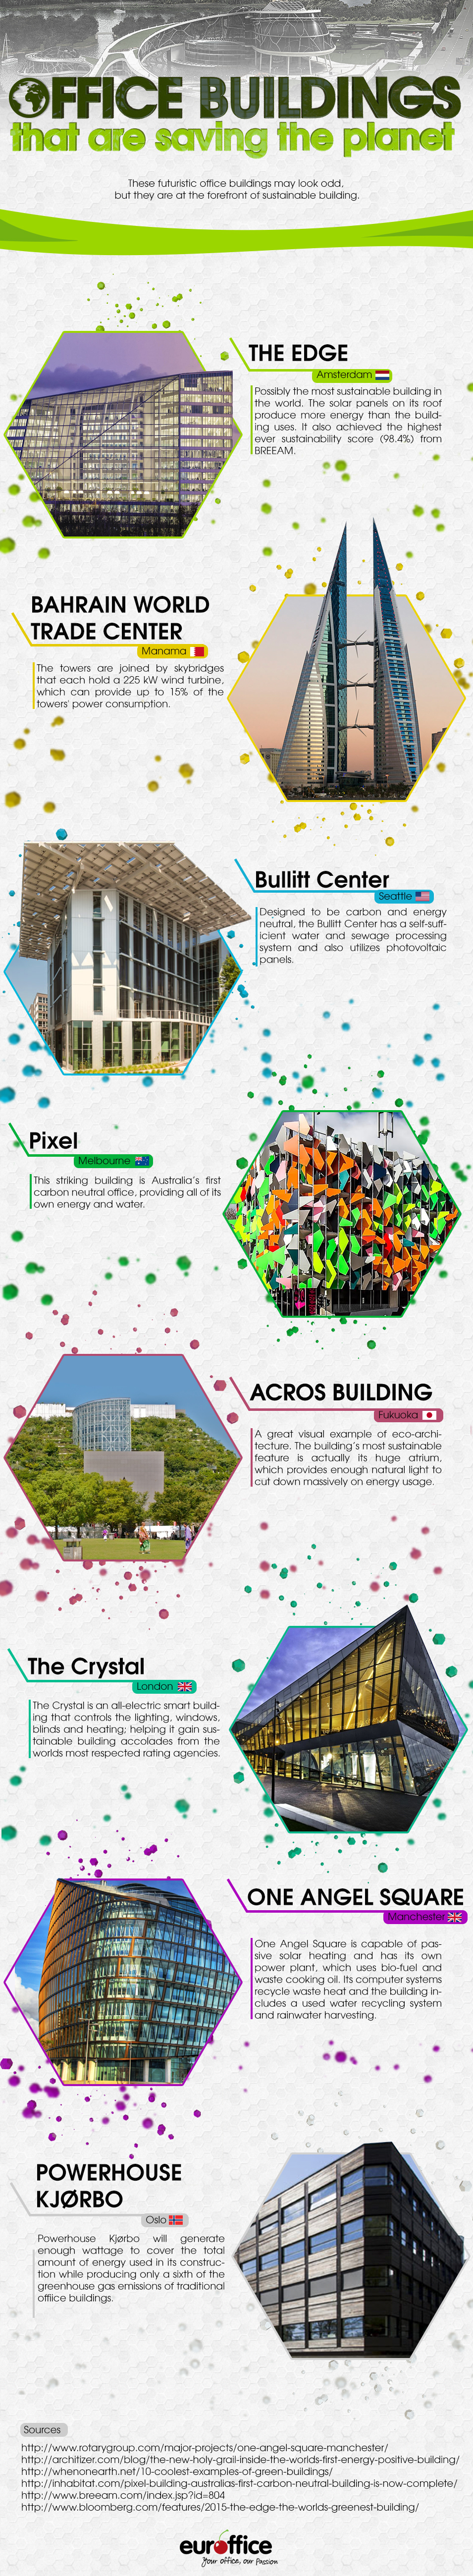 World's Most Environmentally Friendly Office Buildings